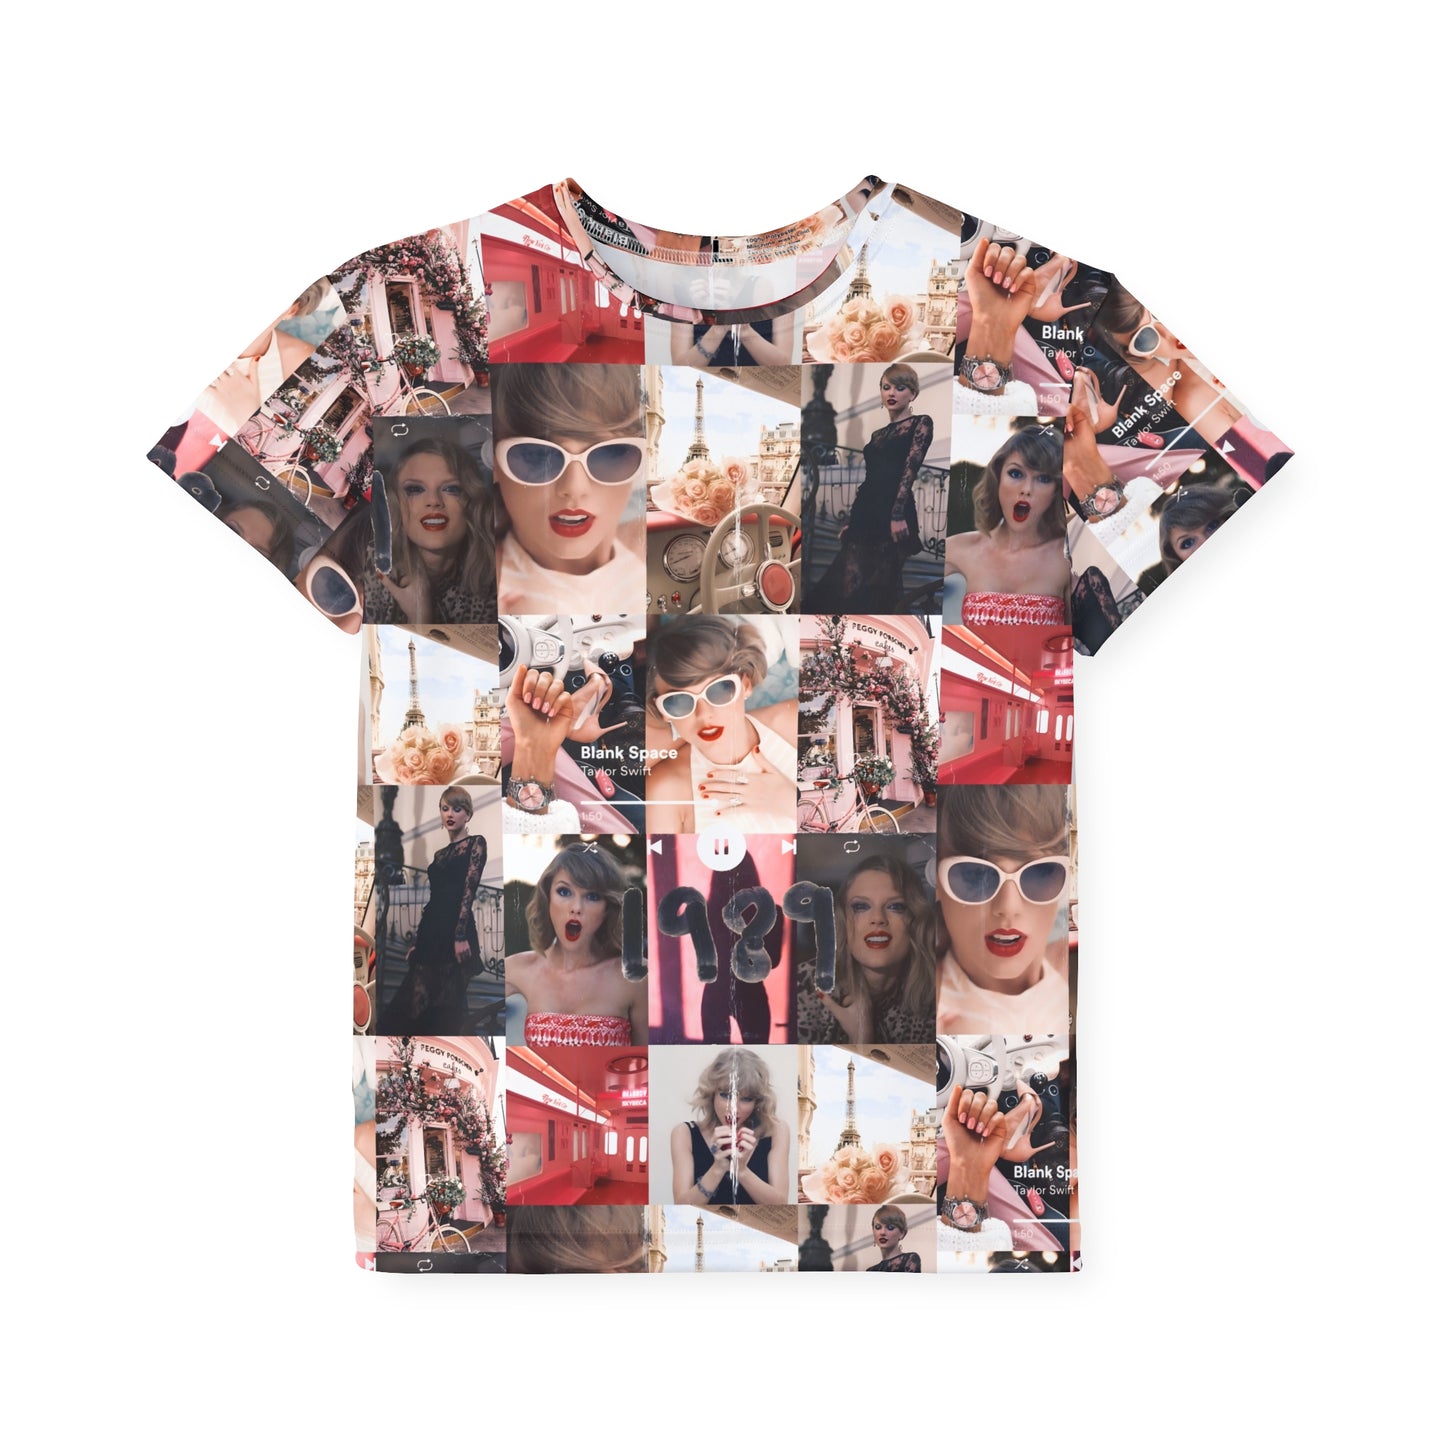 Taylor Swift 1989 Blank Space Collage Kids Sports Jersey